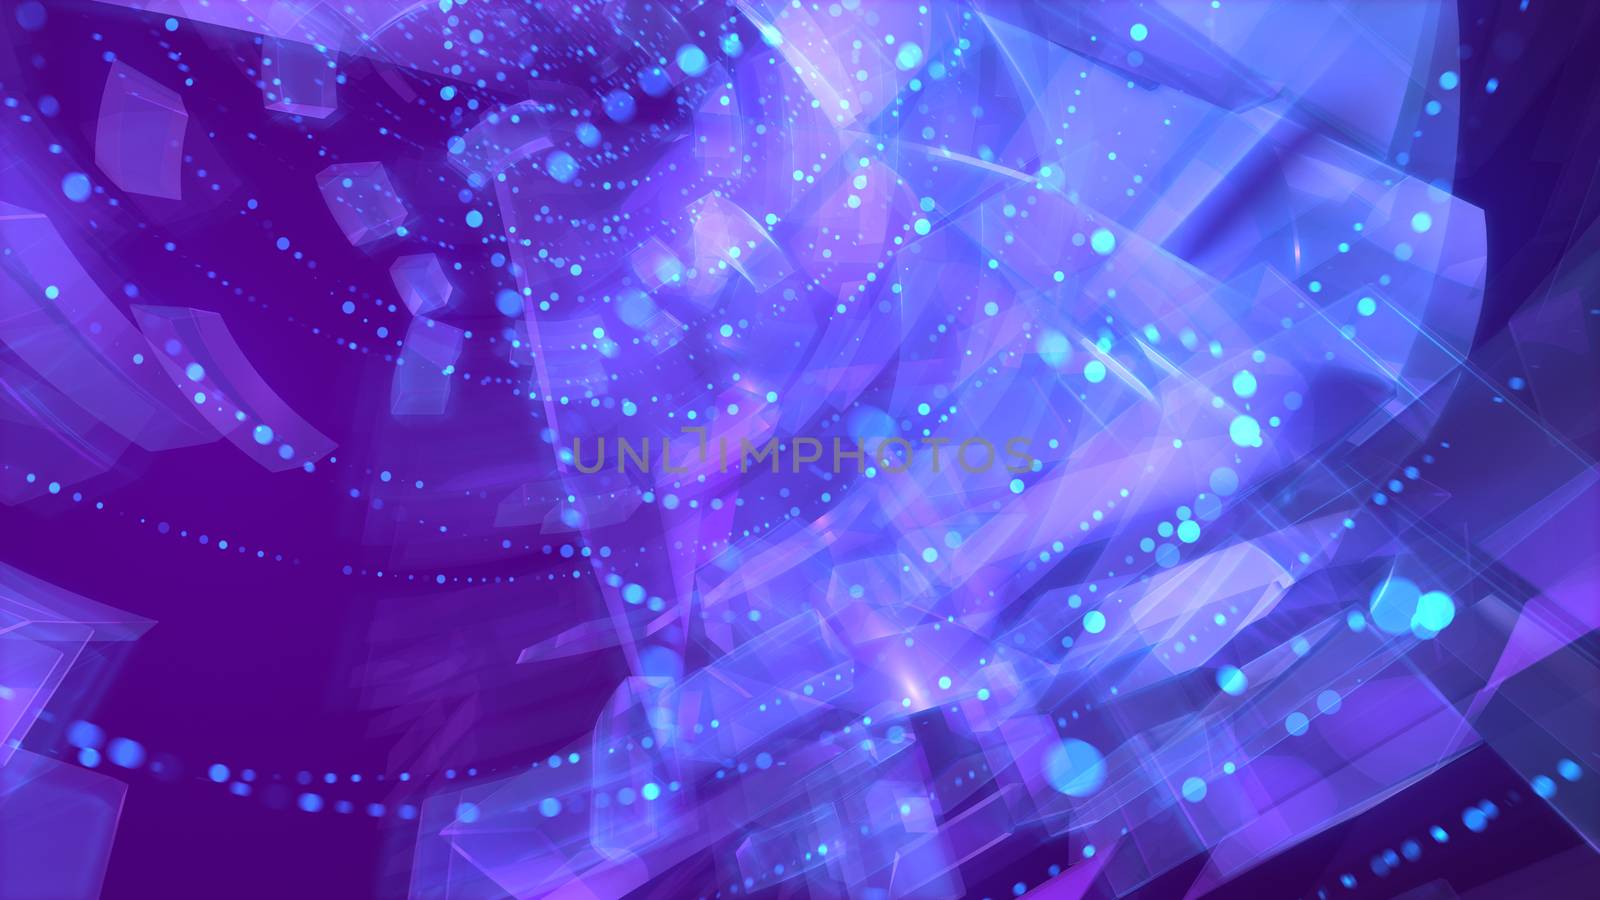 Volumetric 3d illustration of spinning spirals flying in cloudy nebulas in the light violet background. It looks like a mysterious and futuristic time portal.